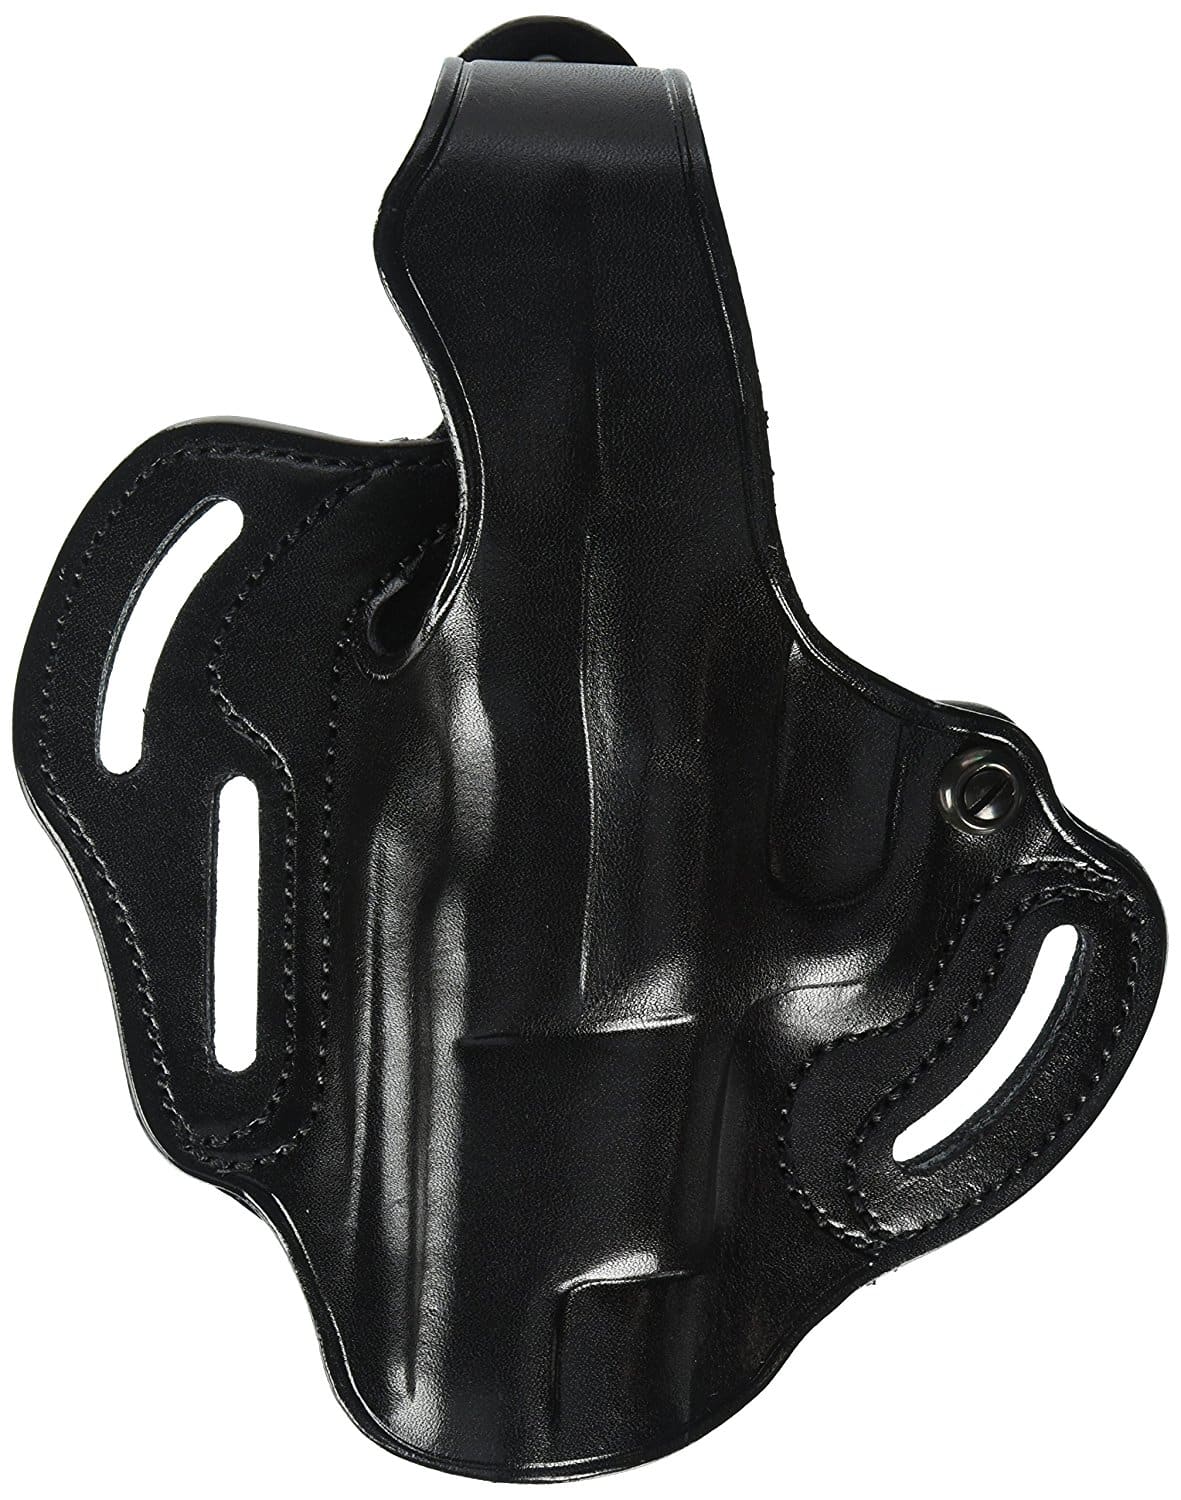 USA MADE RUGER P85 CONCEAL CONCEAL CARRY COMFORT HOLSTER BY ACE CASE 